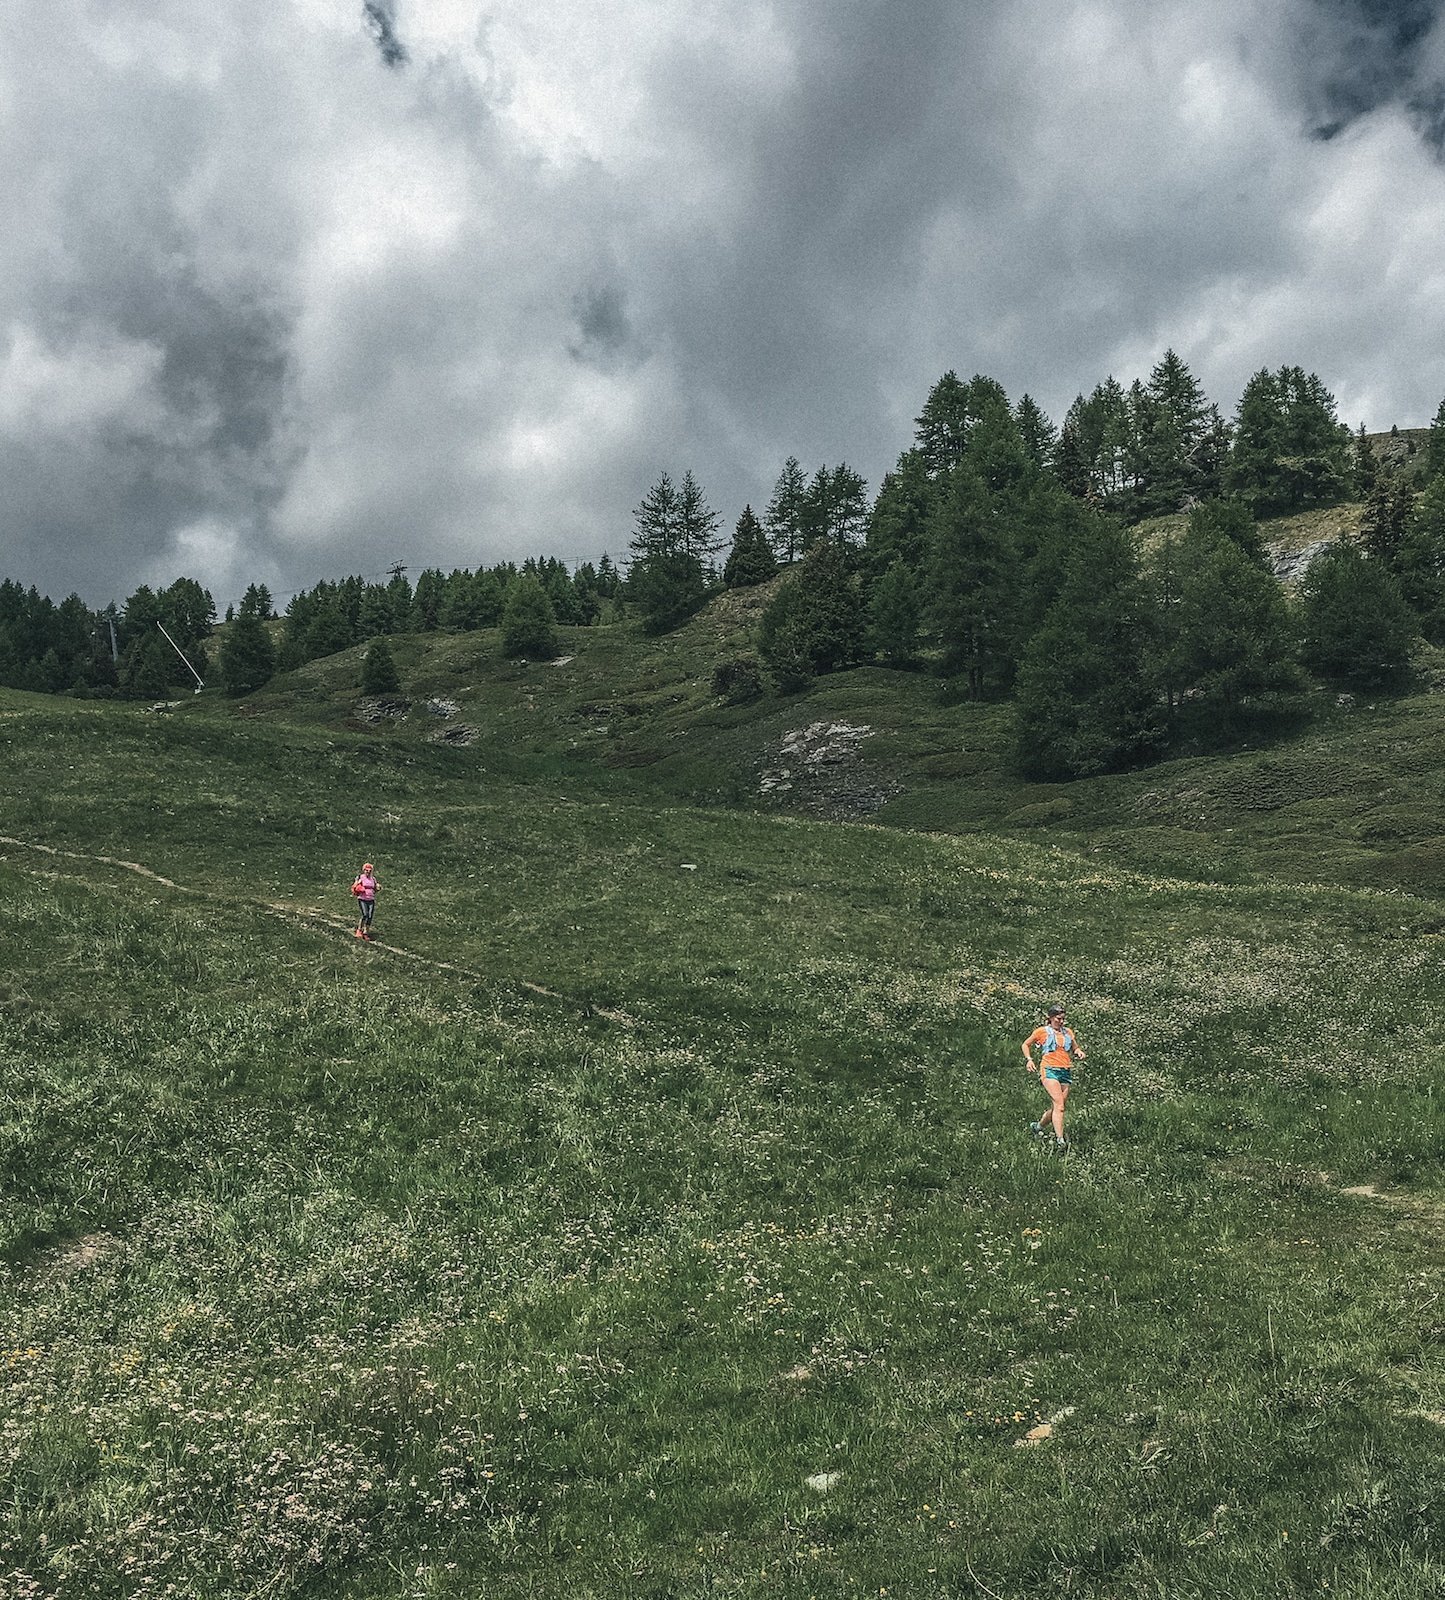 Trail Running Aosta Valley Italy - Trail & Kale